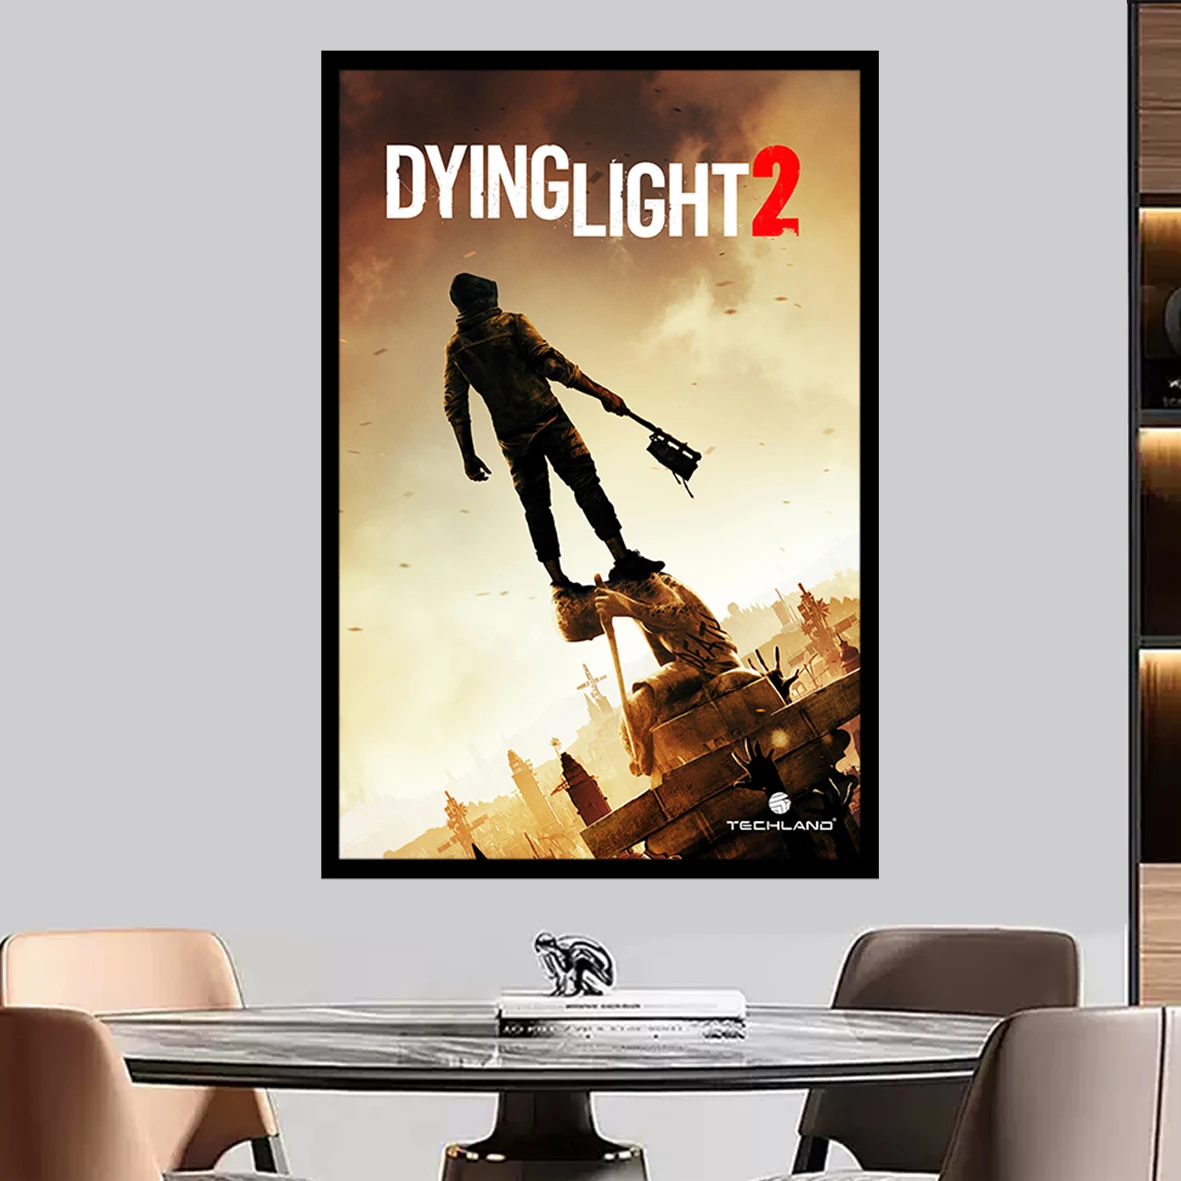 Dying Light 2 Play game Canvas Poster HD large wall art decorative painting Home bedroom Decor Painting Custom size